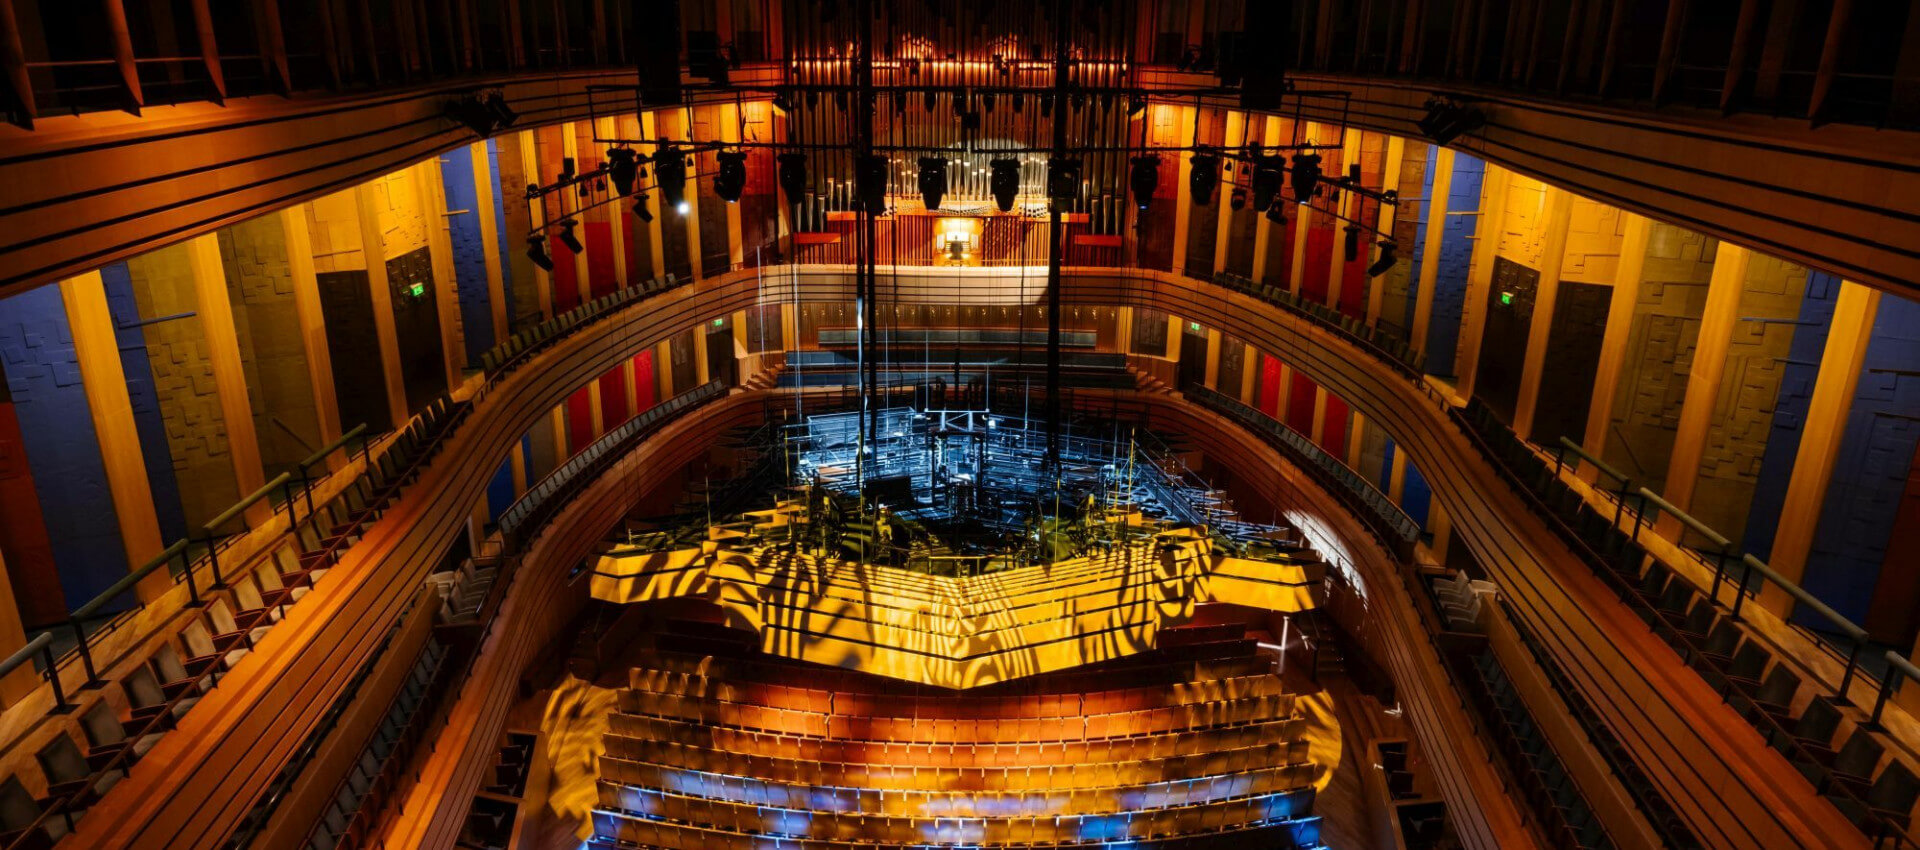 Gallery Concert - The Sound of the Organ in a New Dimension, National Concert Hall Budapest, 4 April